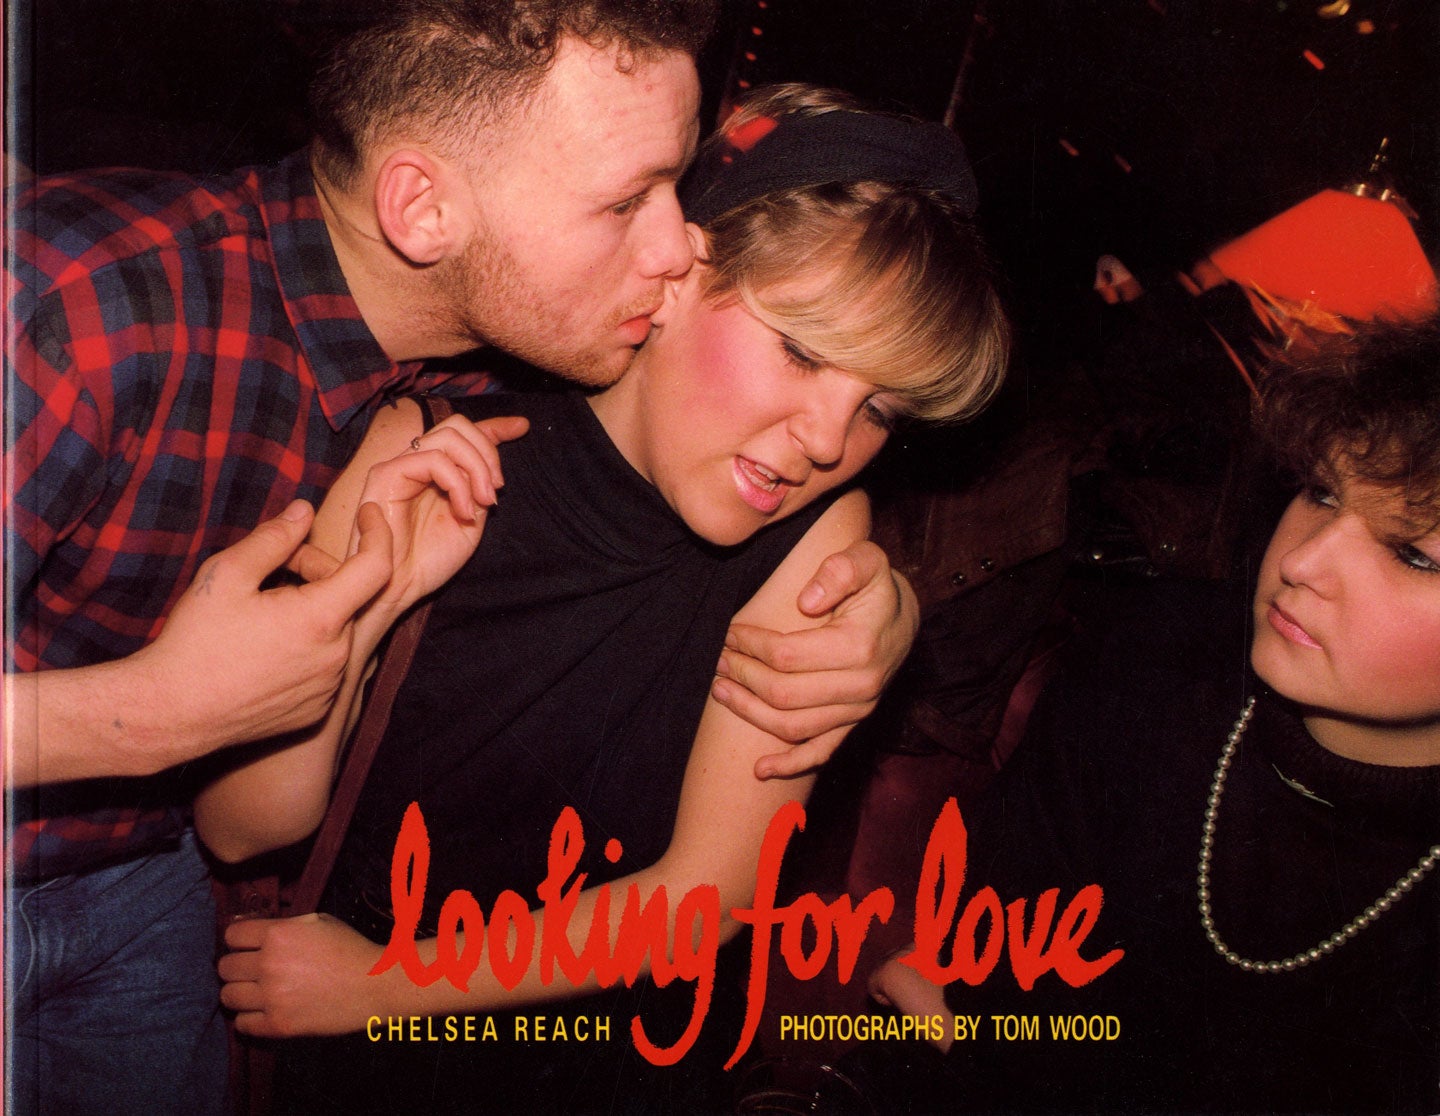 Tom Wood: Looking for Love, Photographs from Chelsea Reach Nightclub, New Brighton, Merseyside [SIGNED & INSCRIBED]